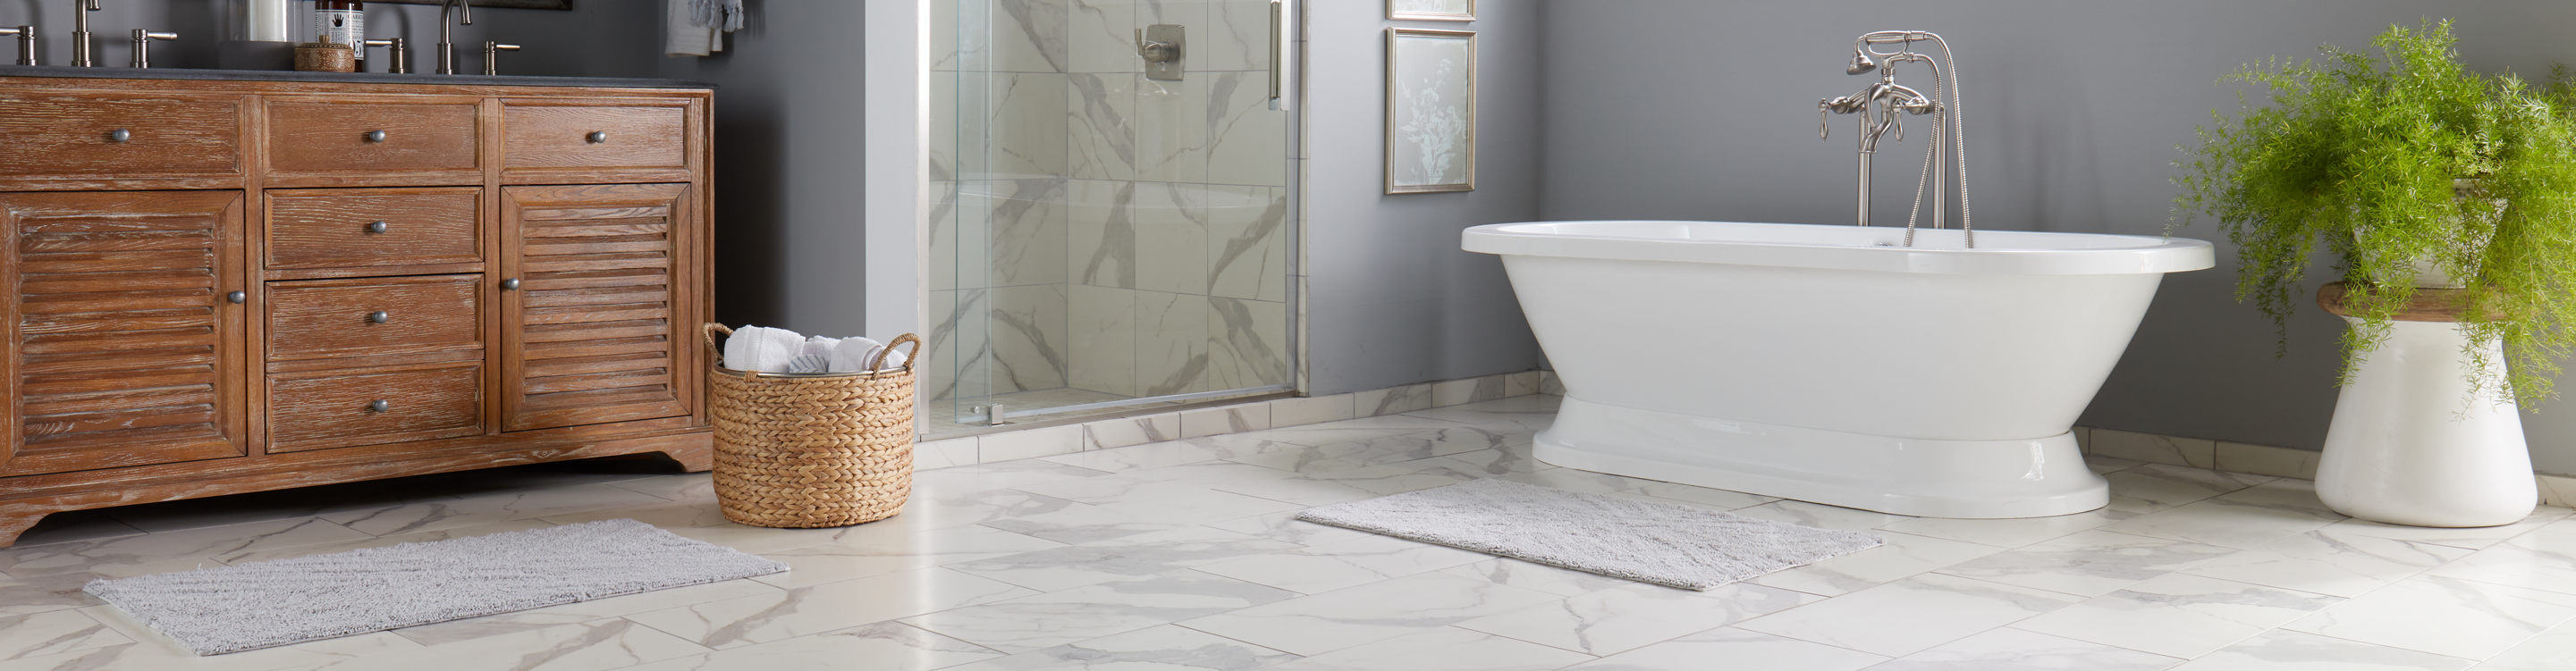 marble floor tile and shower tile in a bathroom